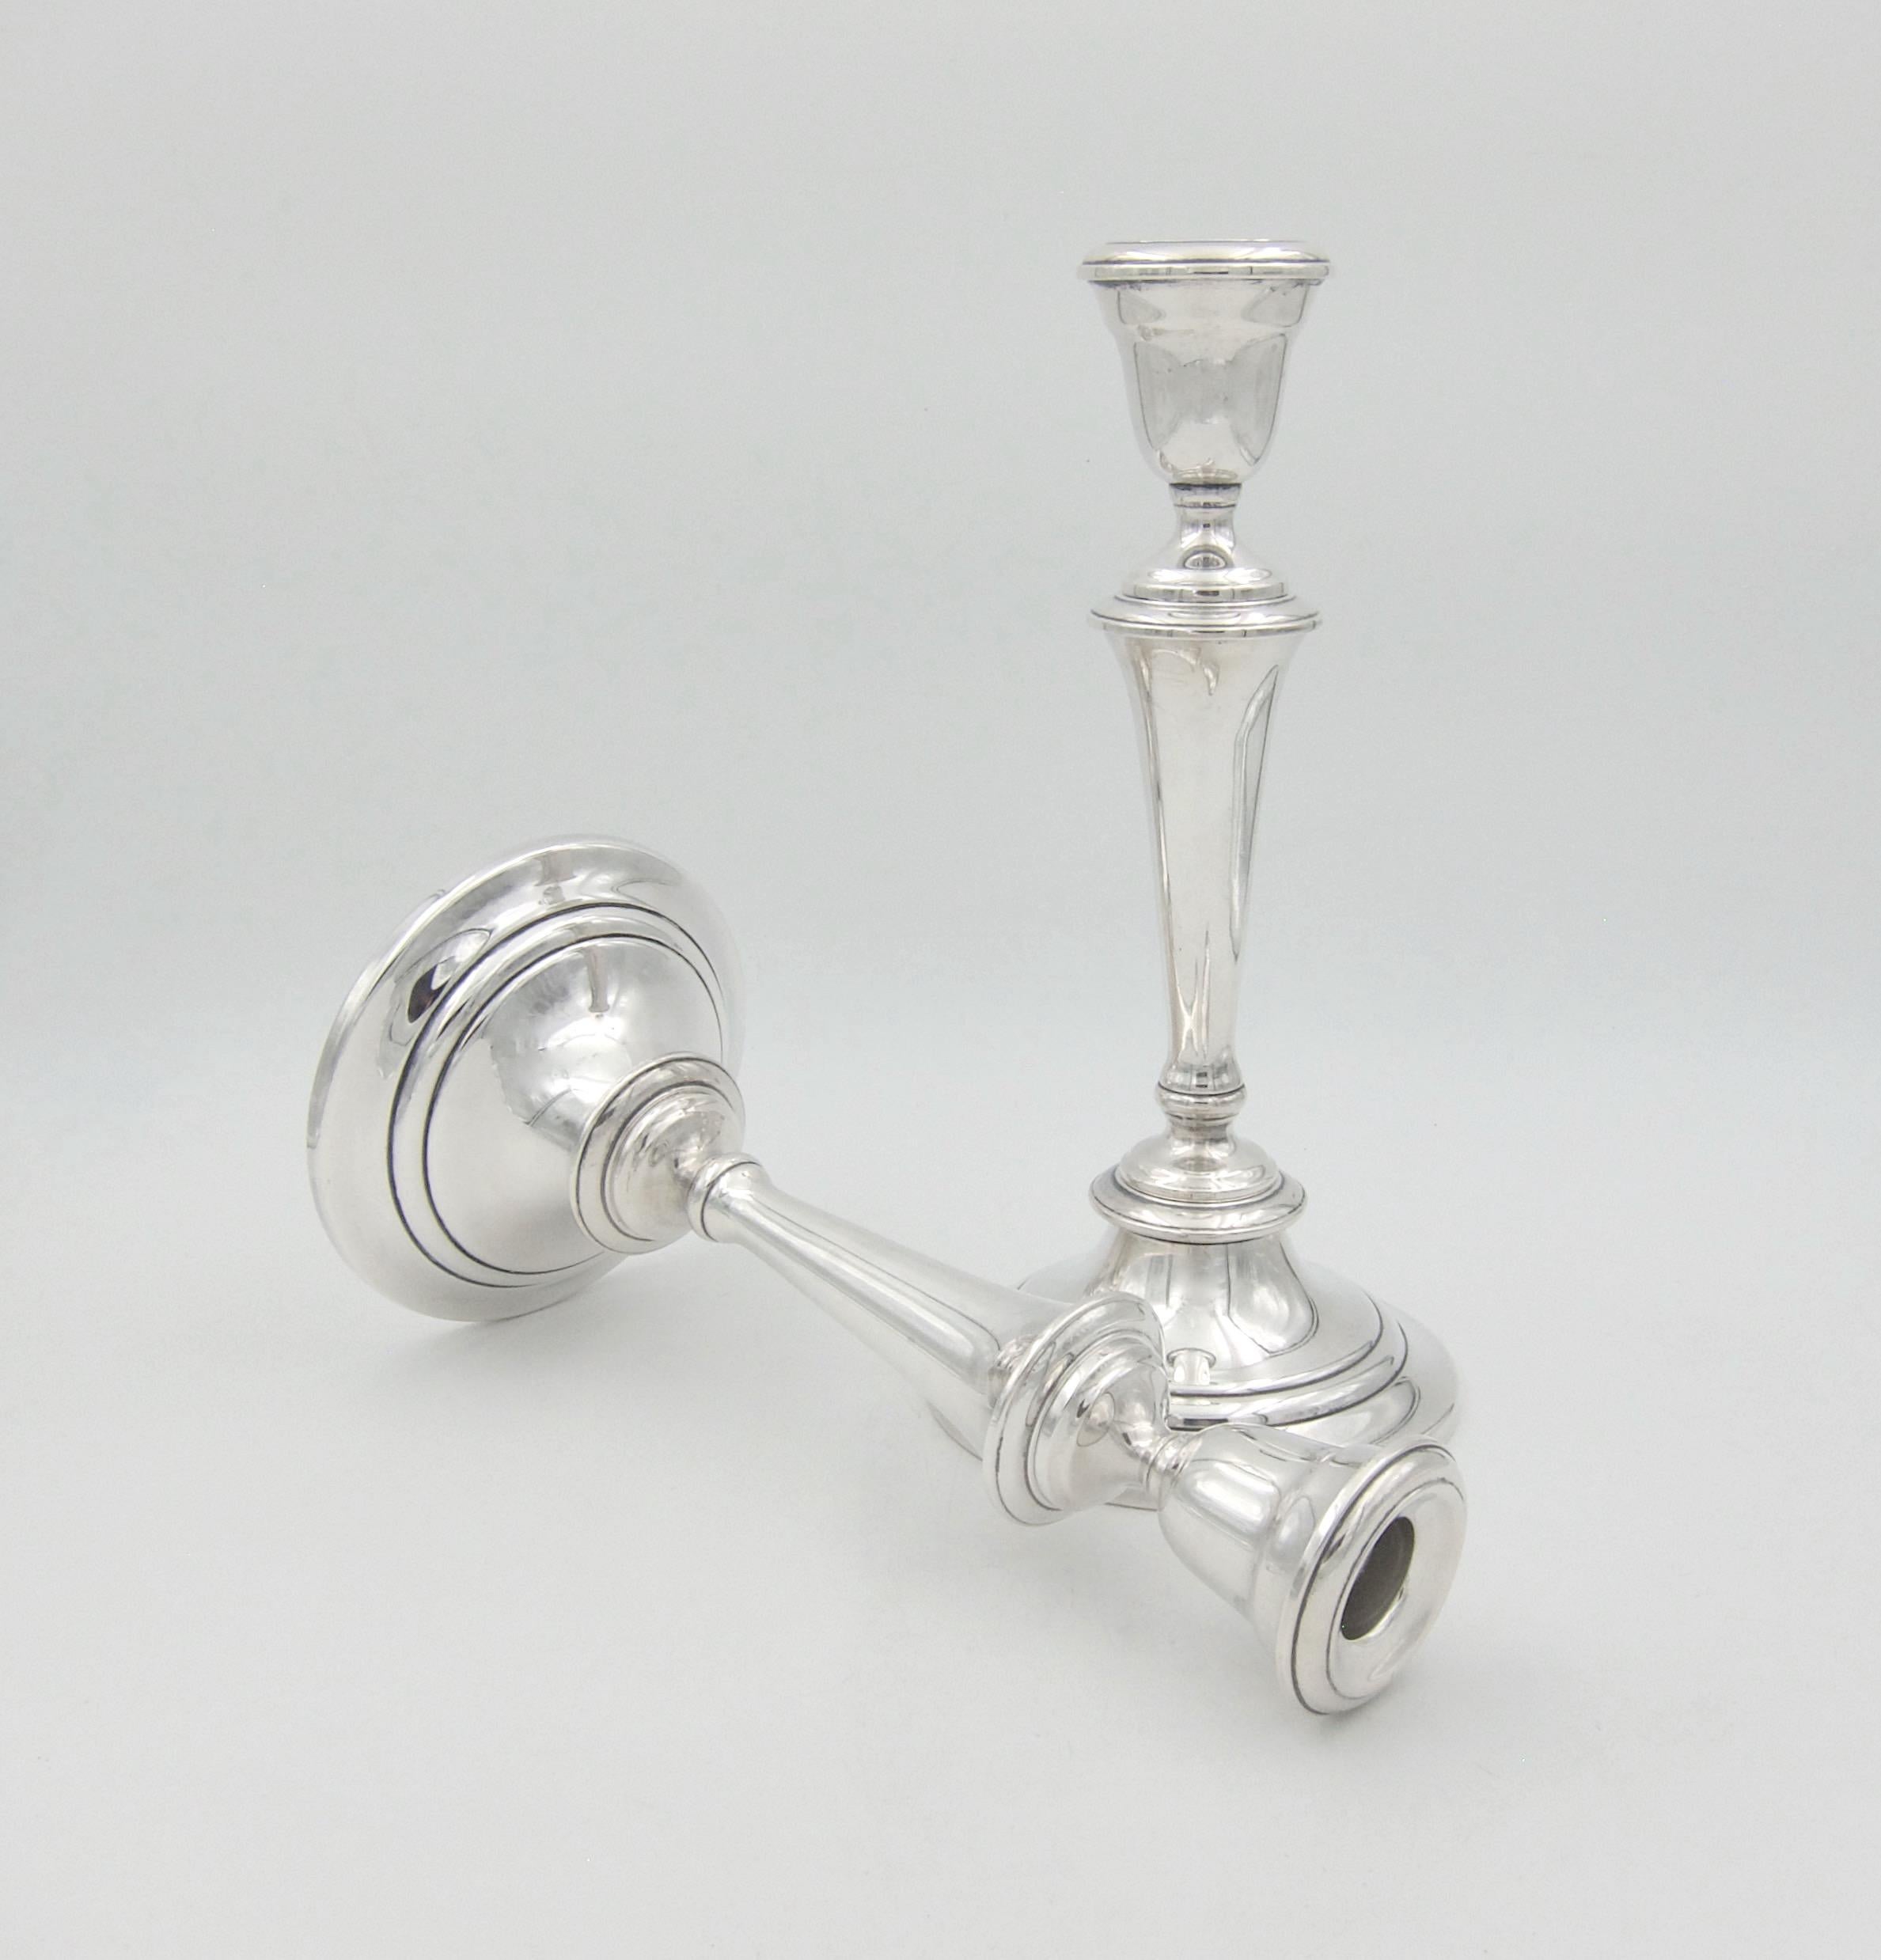 A vintage convertible candlestick pair from Gorham Manufacturing Company of Providence, Rhode Island. The silver plated candle holders are each composed of three parts: a weighted circular base supporting a tapering stem with an urn on top. The